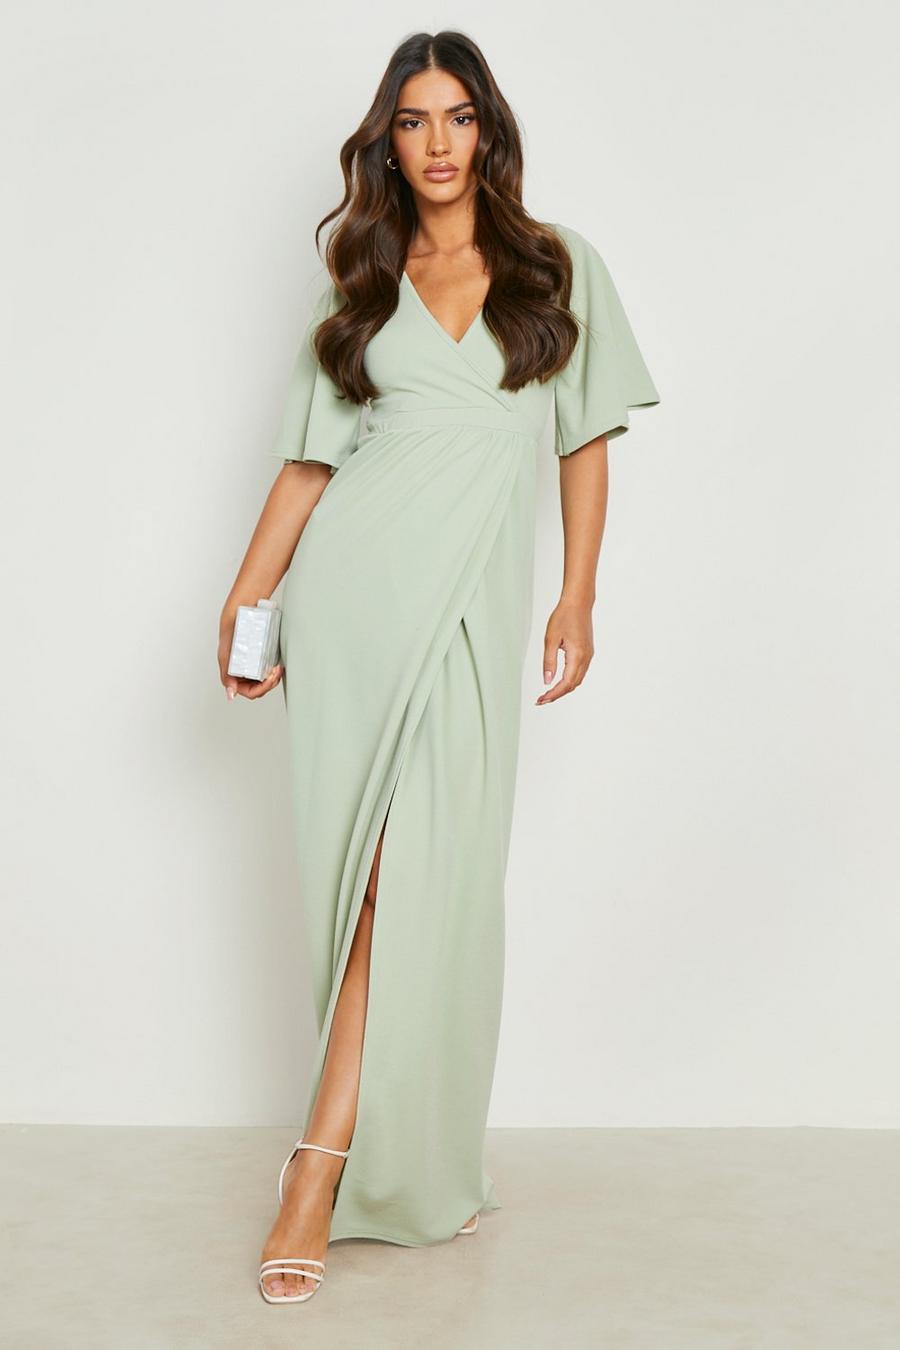 Sage All Occasion Dresses 